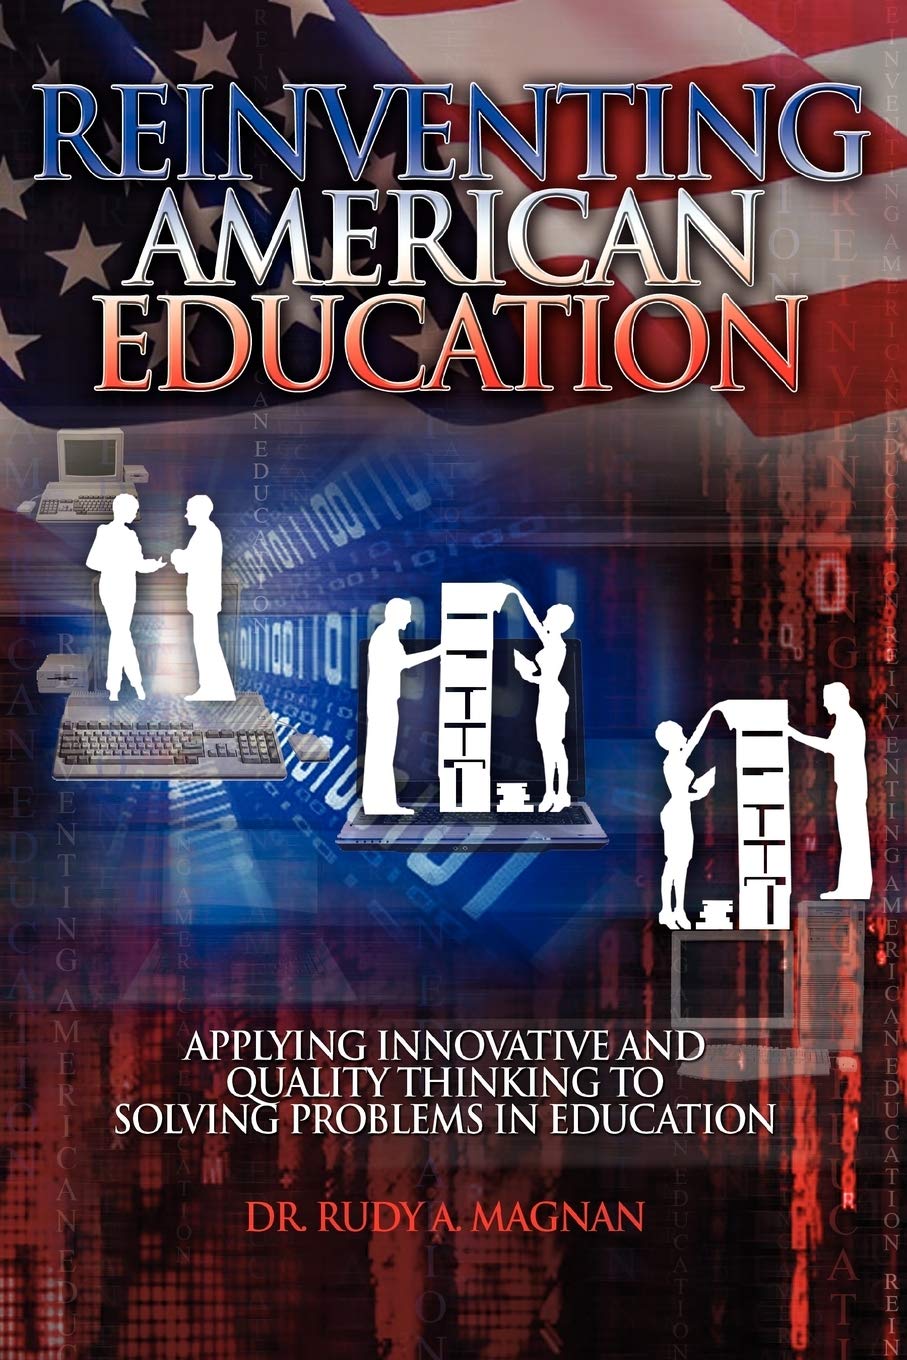 Author’s Tranquility Press Backs Dr. Rudy A Magnan’s Quest of Reinventing American Education